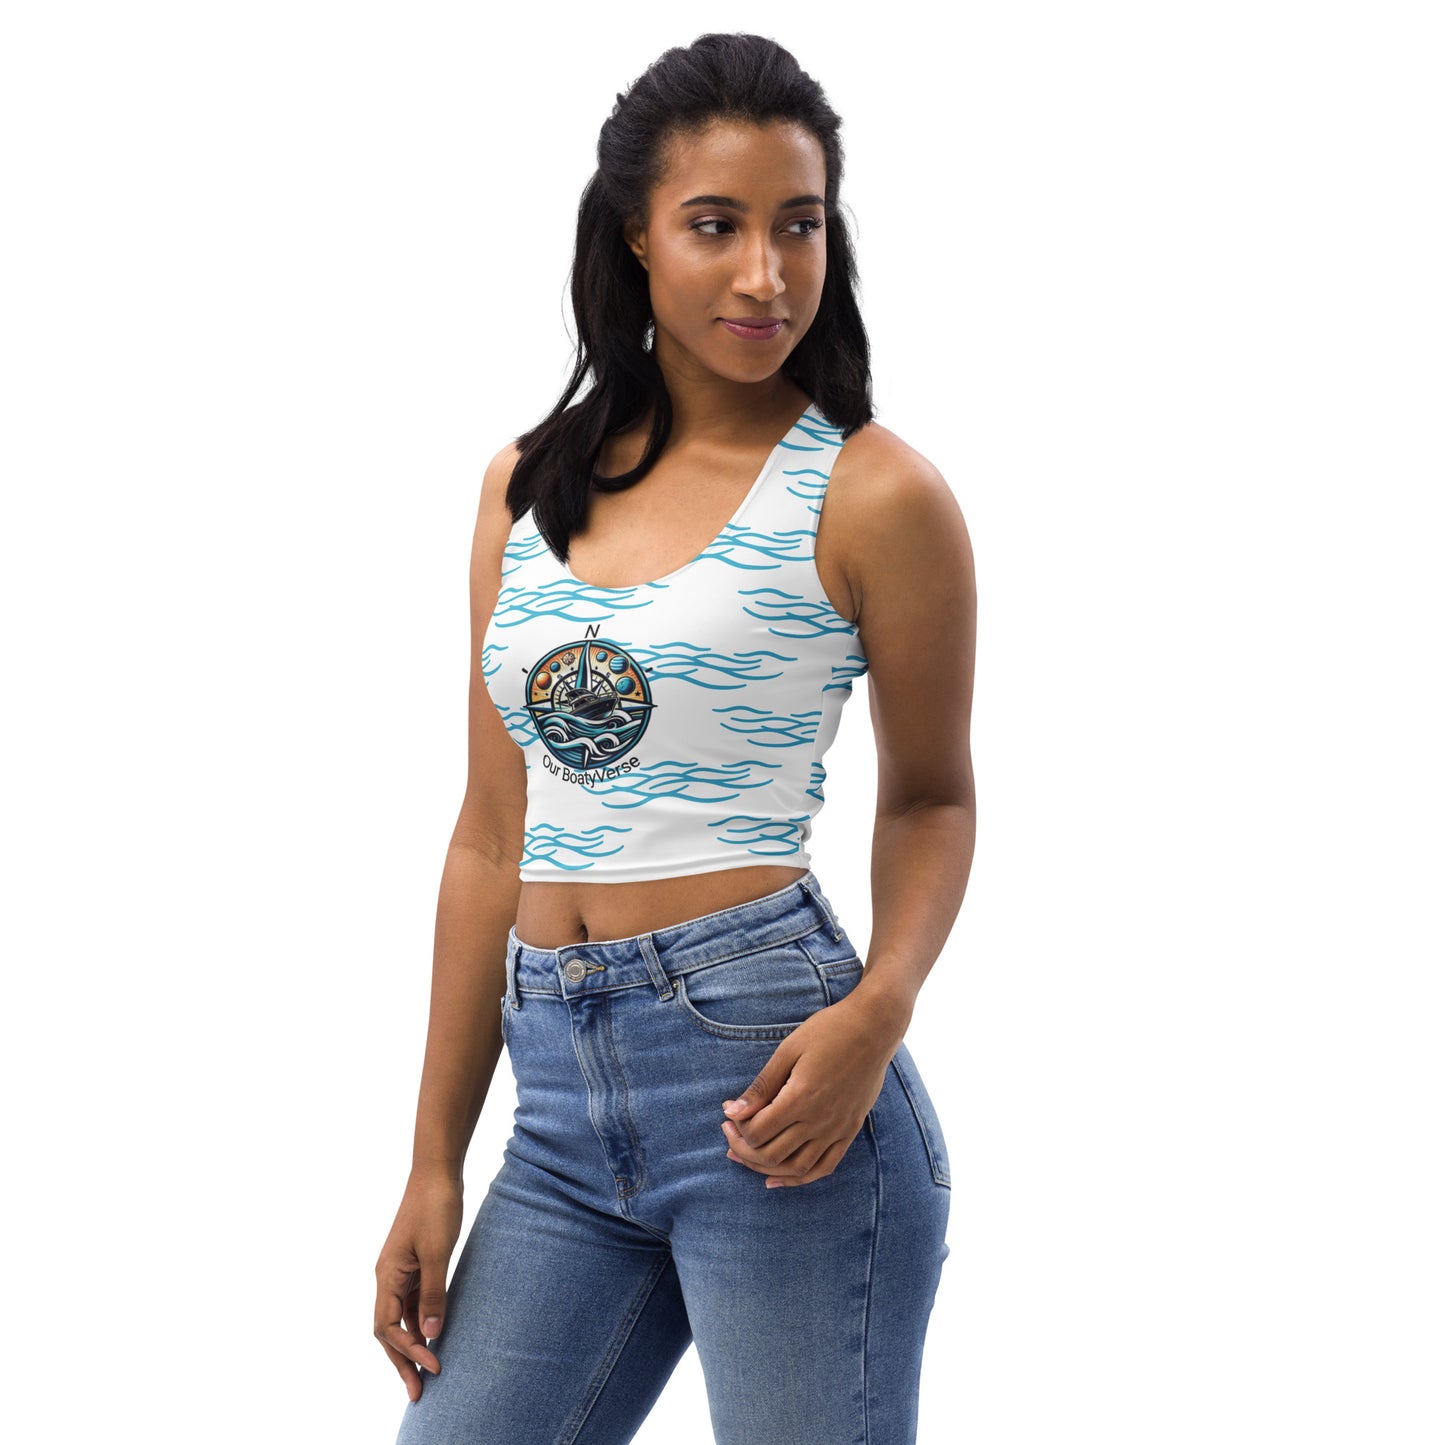 Our Waves Gym Crop Top by Our BoatyVerse